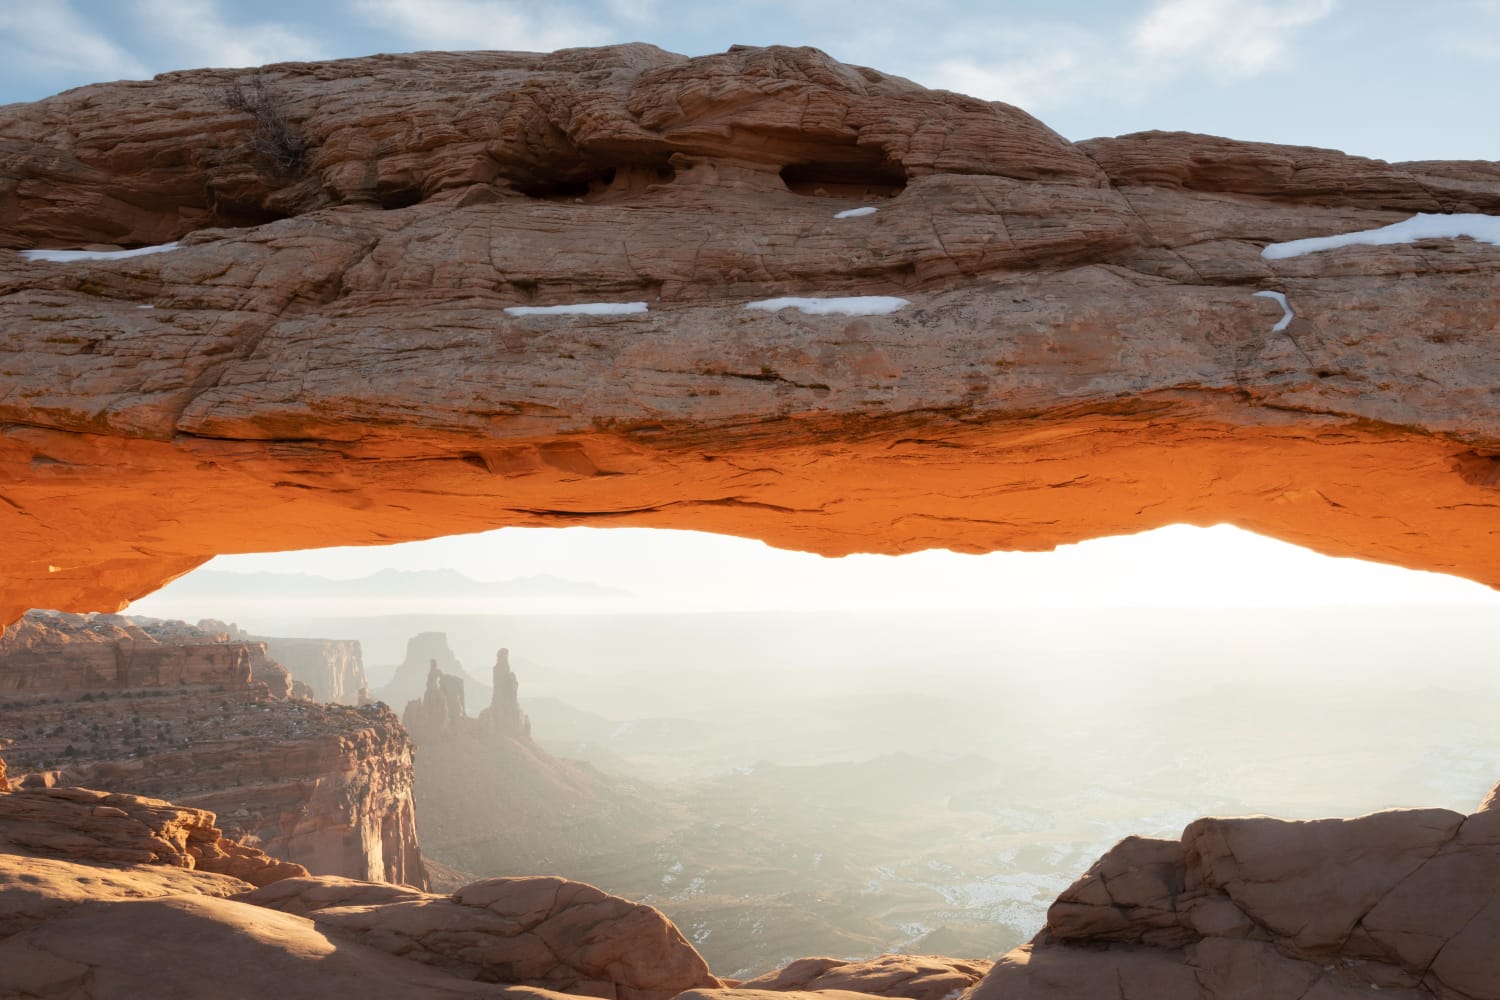 Morning glow on the sandstone of Canyonlands National Park, Utah